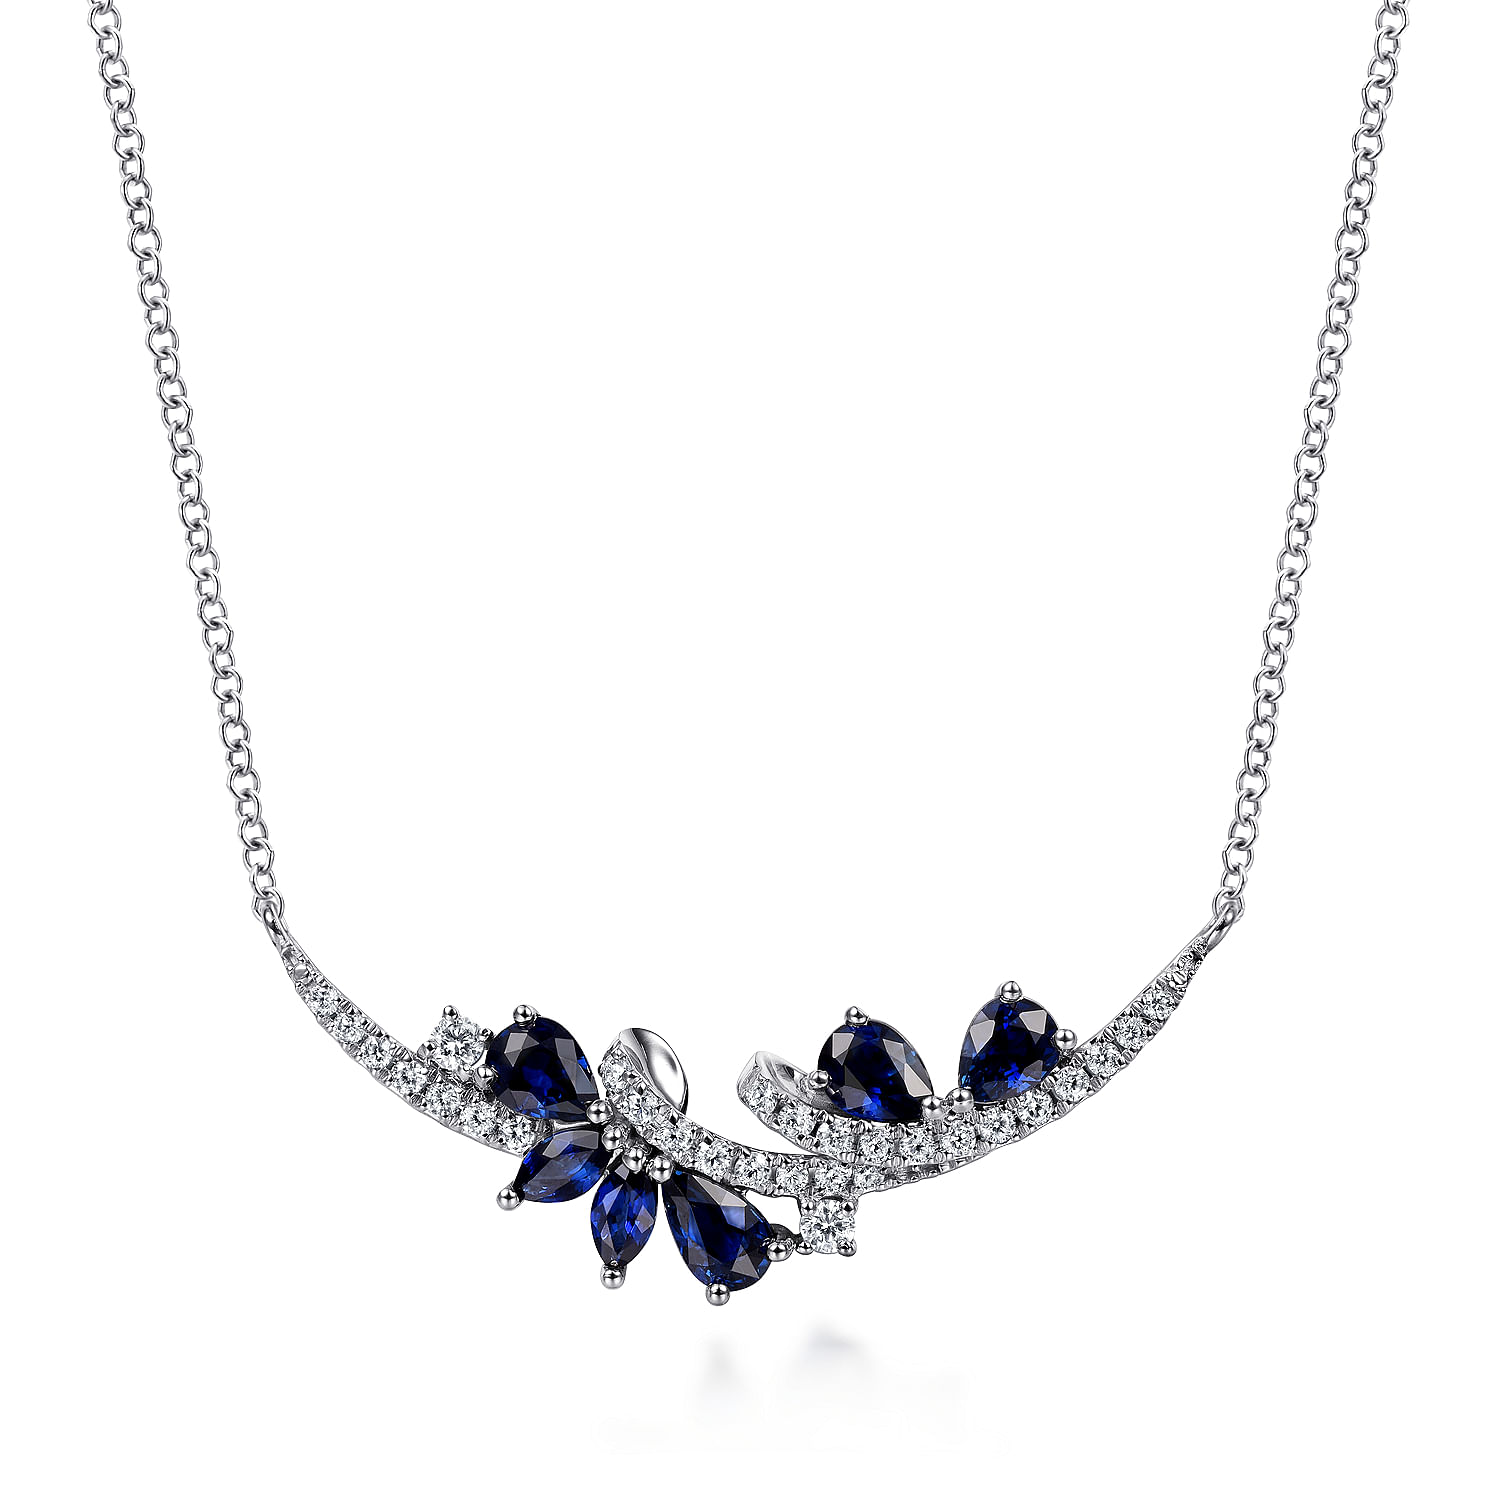 Gabriel - 14K White Gold Diamond and Sapphire Curved Bar Necklace